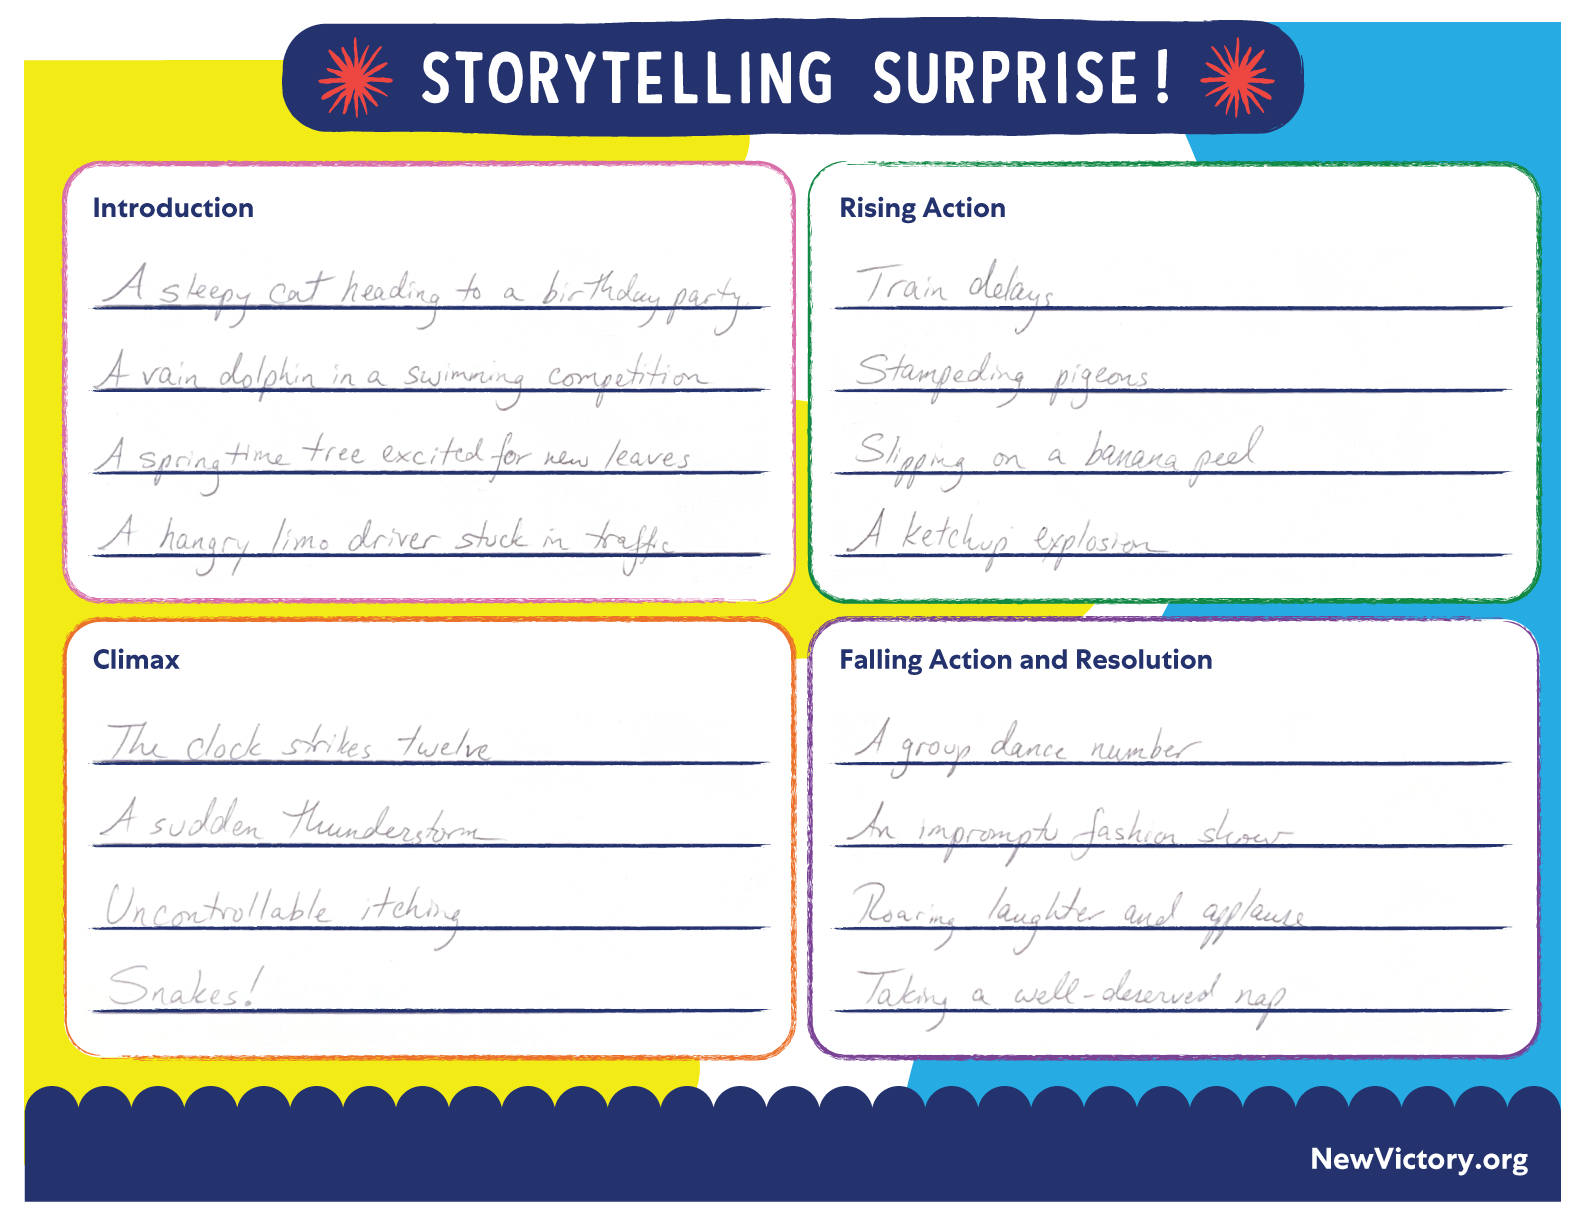 Storytelling Surprise template with sections for Introduction, Rising Action, Climax and Falling Action/Resolution